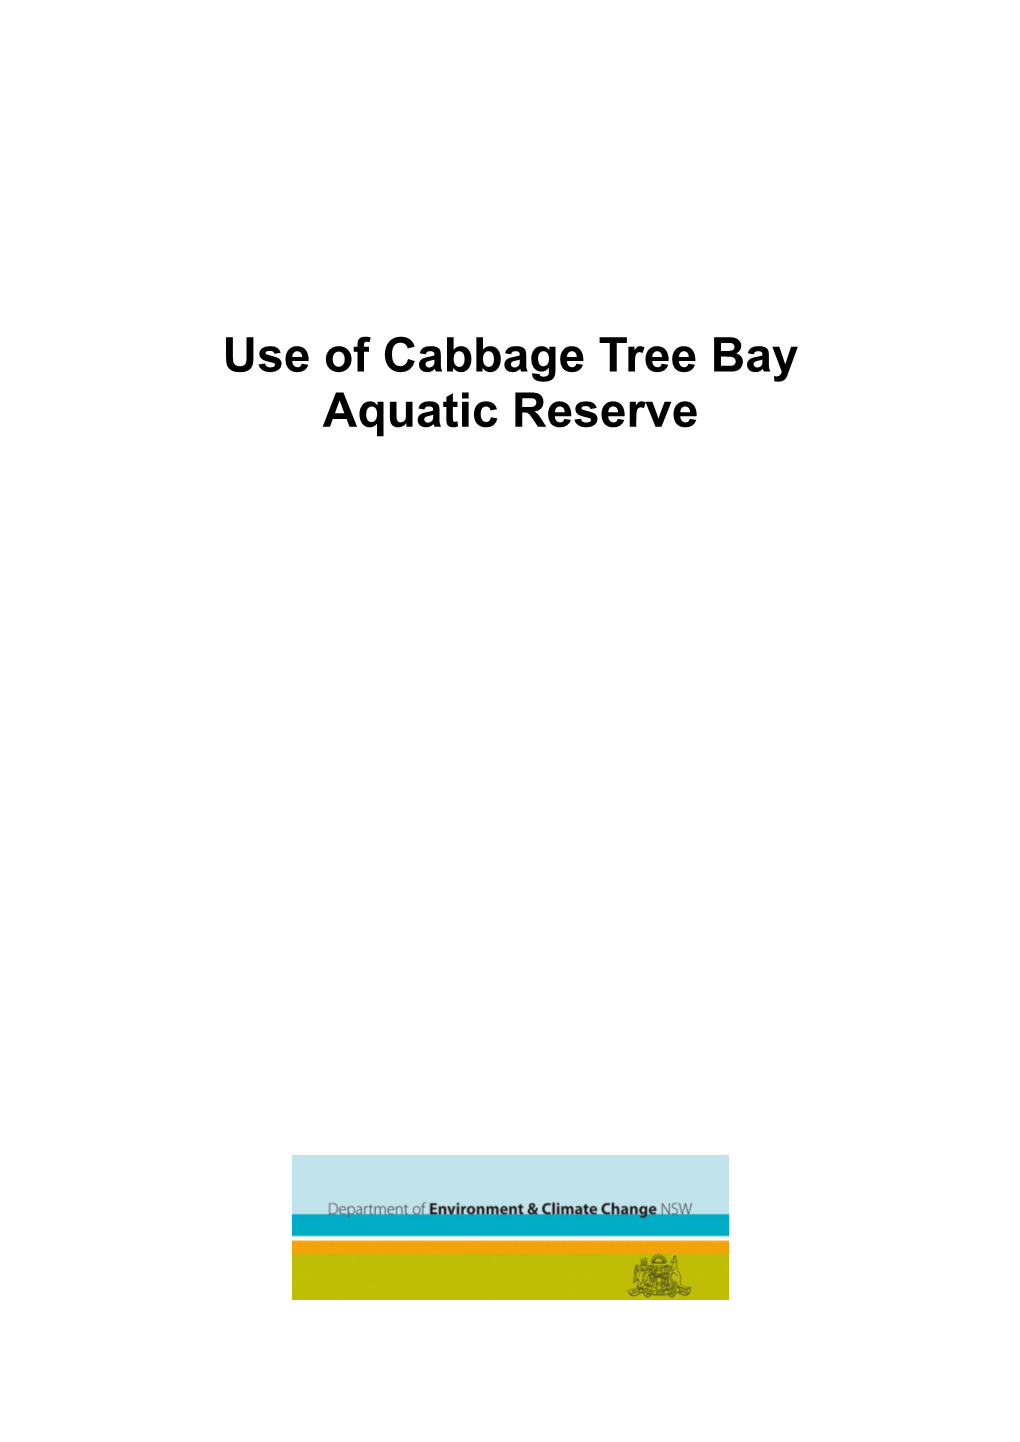 Use of Cabbage Tree Bay Aquatic Reserve